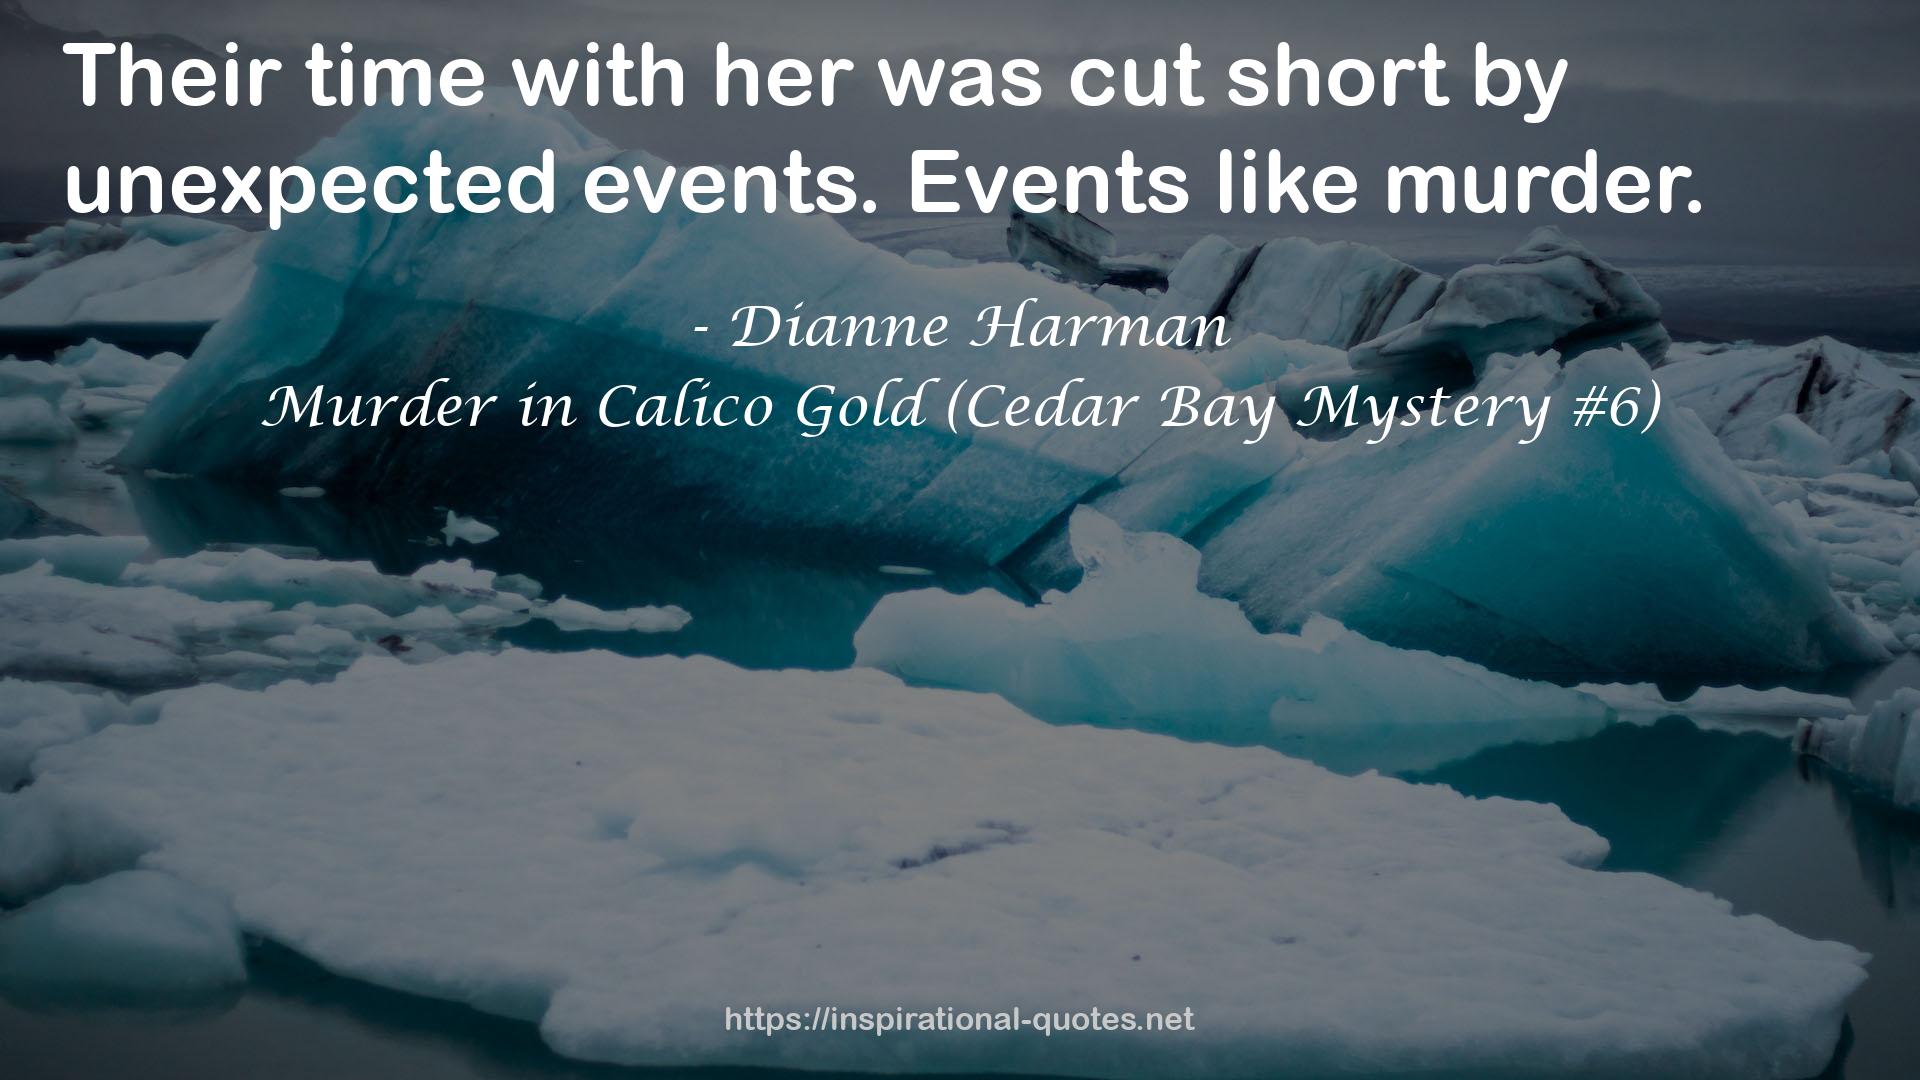 Murder in Calico Gold (Cedar Bay Mystery #6) QUOTES